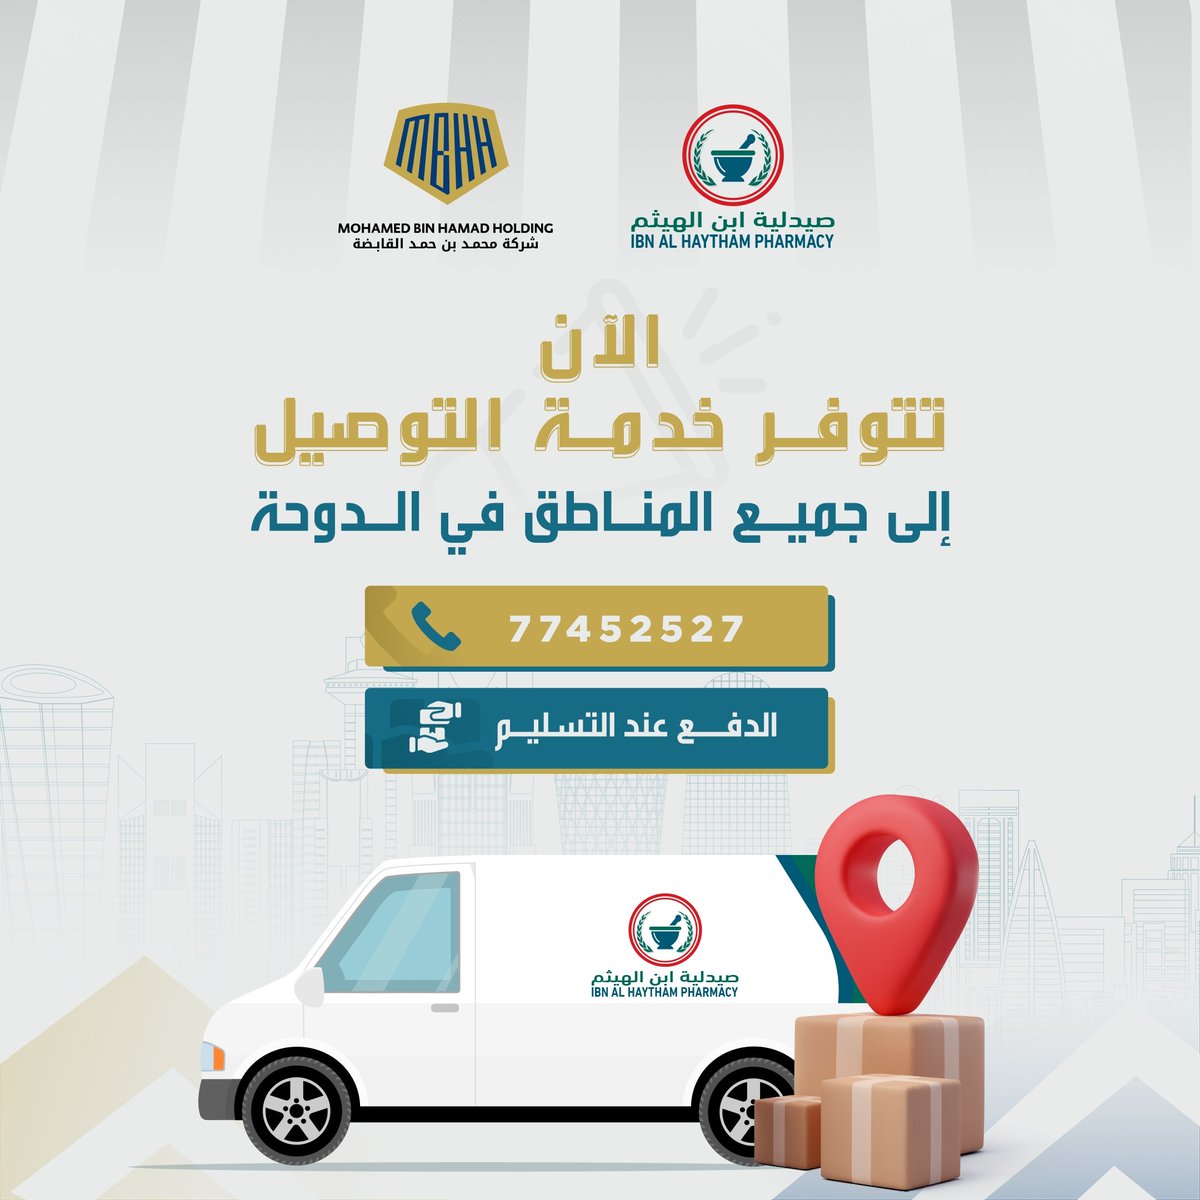 Delivery Services is available now to all destinations in Qatar by Ibn Al-Haytham Pharmacies branches in:
1- Doha Clinic Hospital branch
2- Al-Wajba branch
3- Abu Hamour branch
4- Al-Mamoura branch
5- Al- Nassr branch

#MBHHC #Qatar #Doha #pharmacy  #ibnalhaytham #قطر